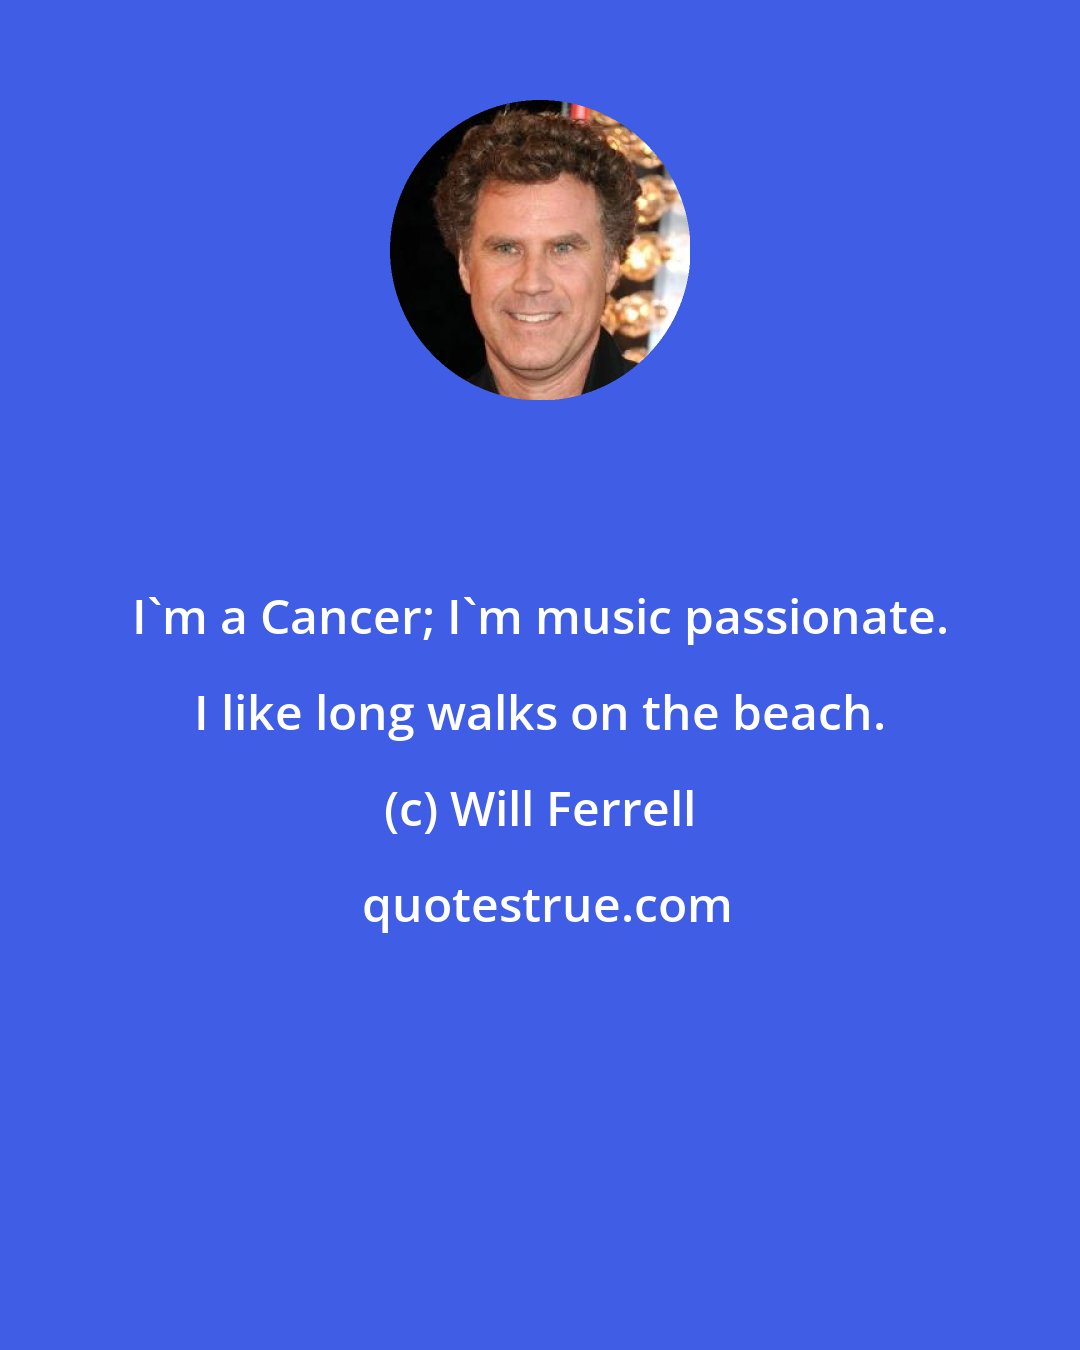 Will Ferrell: I'm a Cancer; I'm music passionate. I like long walks on the beach.